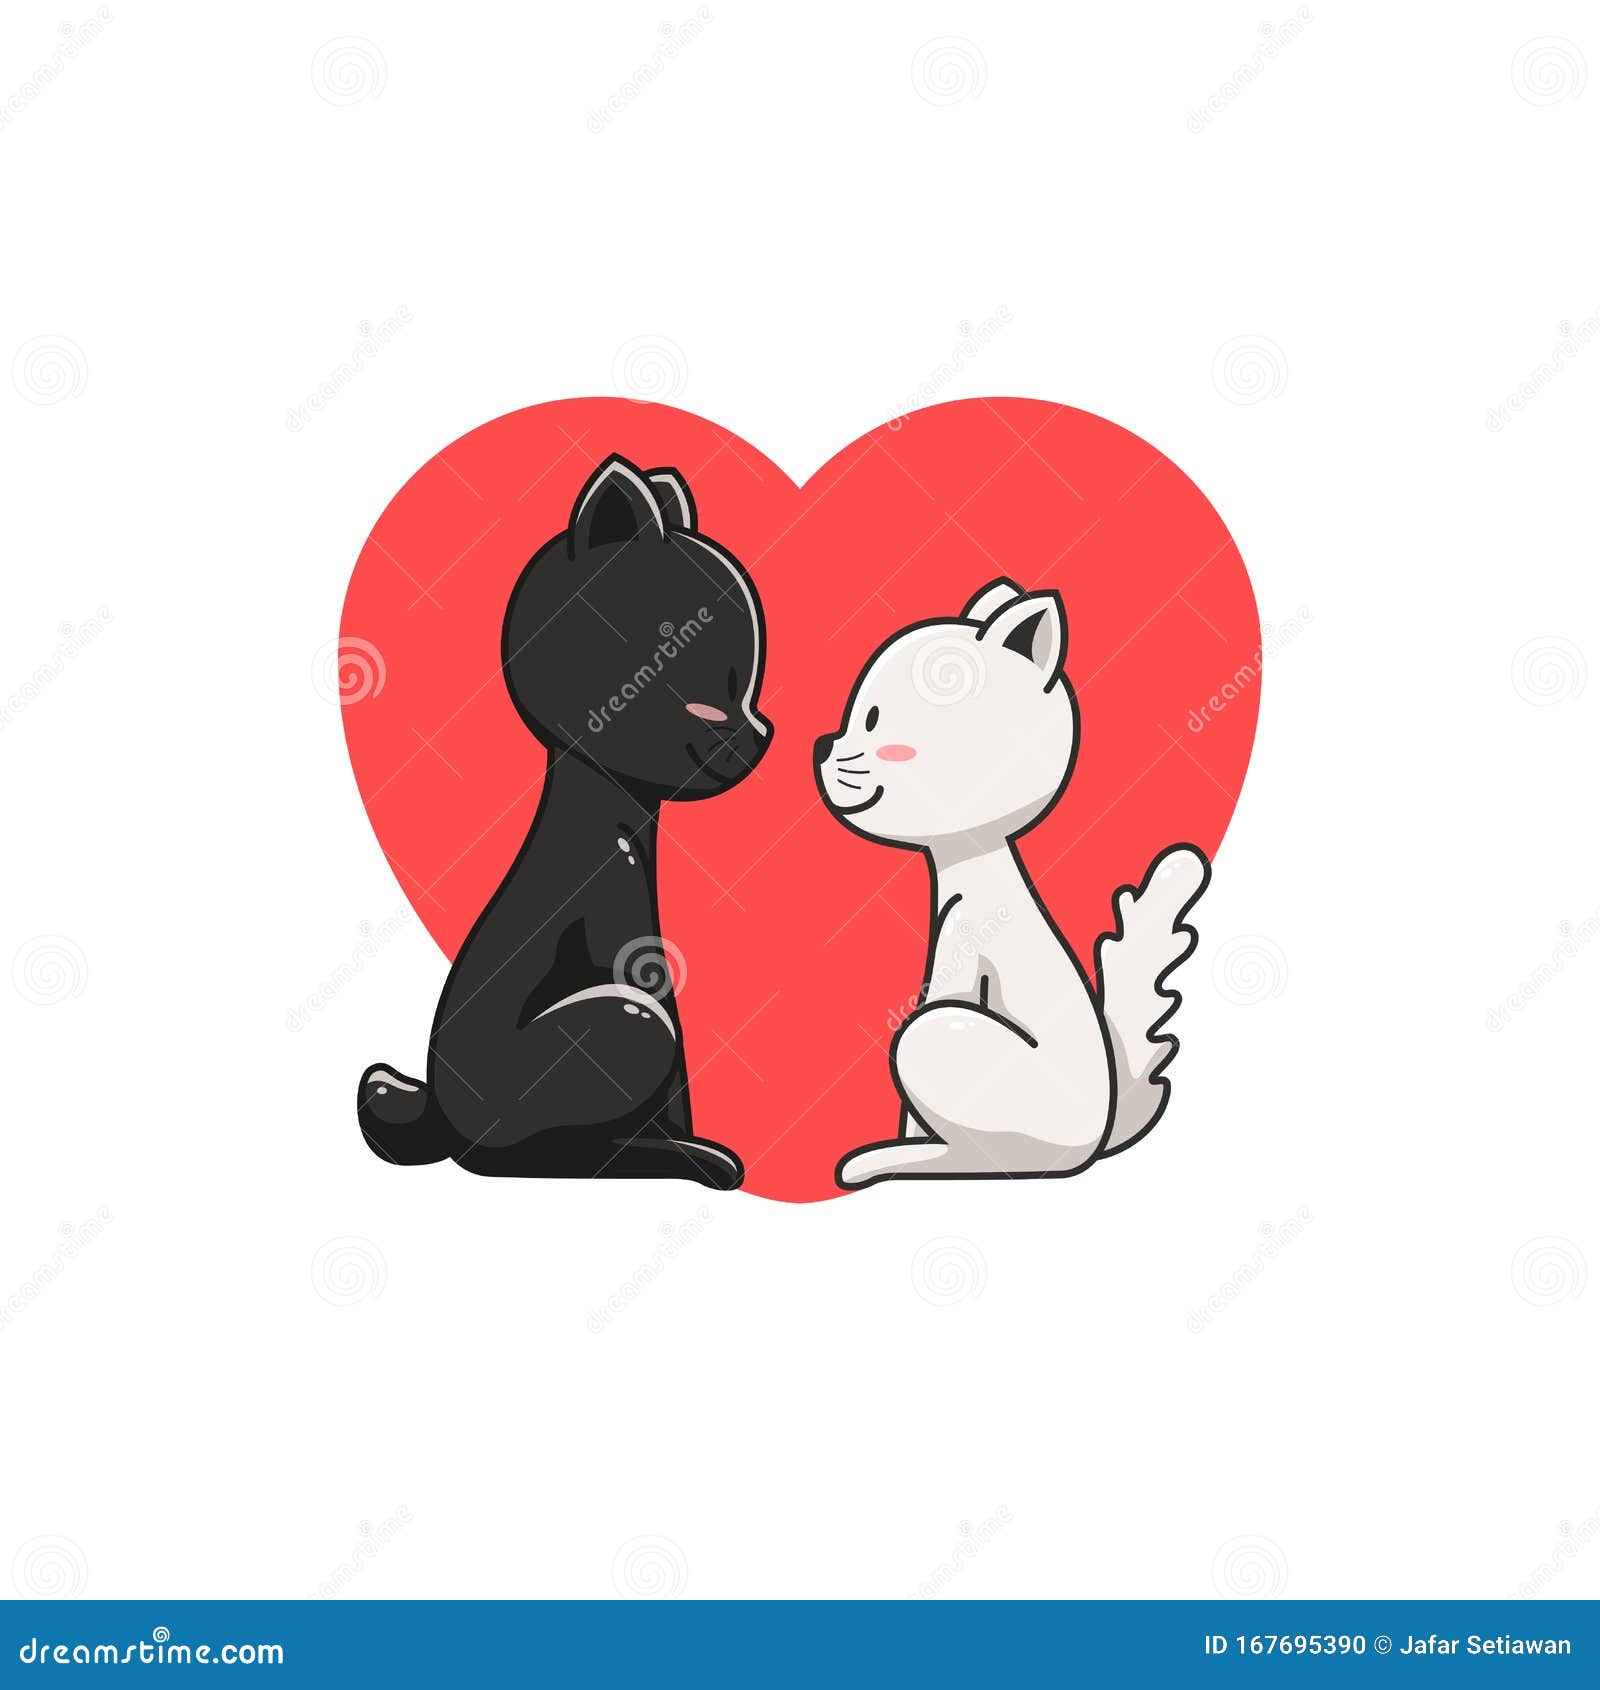 Cute Cartoon of Cat Couple in Love Stock Illustration - Illustration of  element, background: 167695390